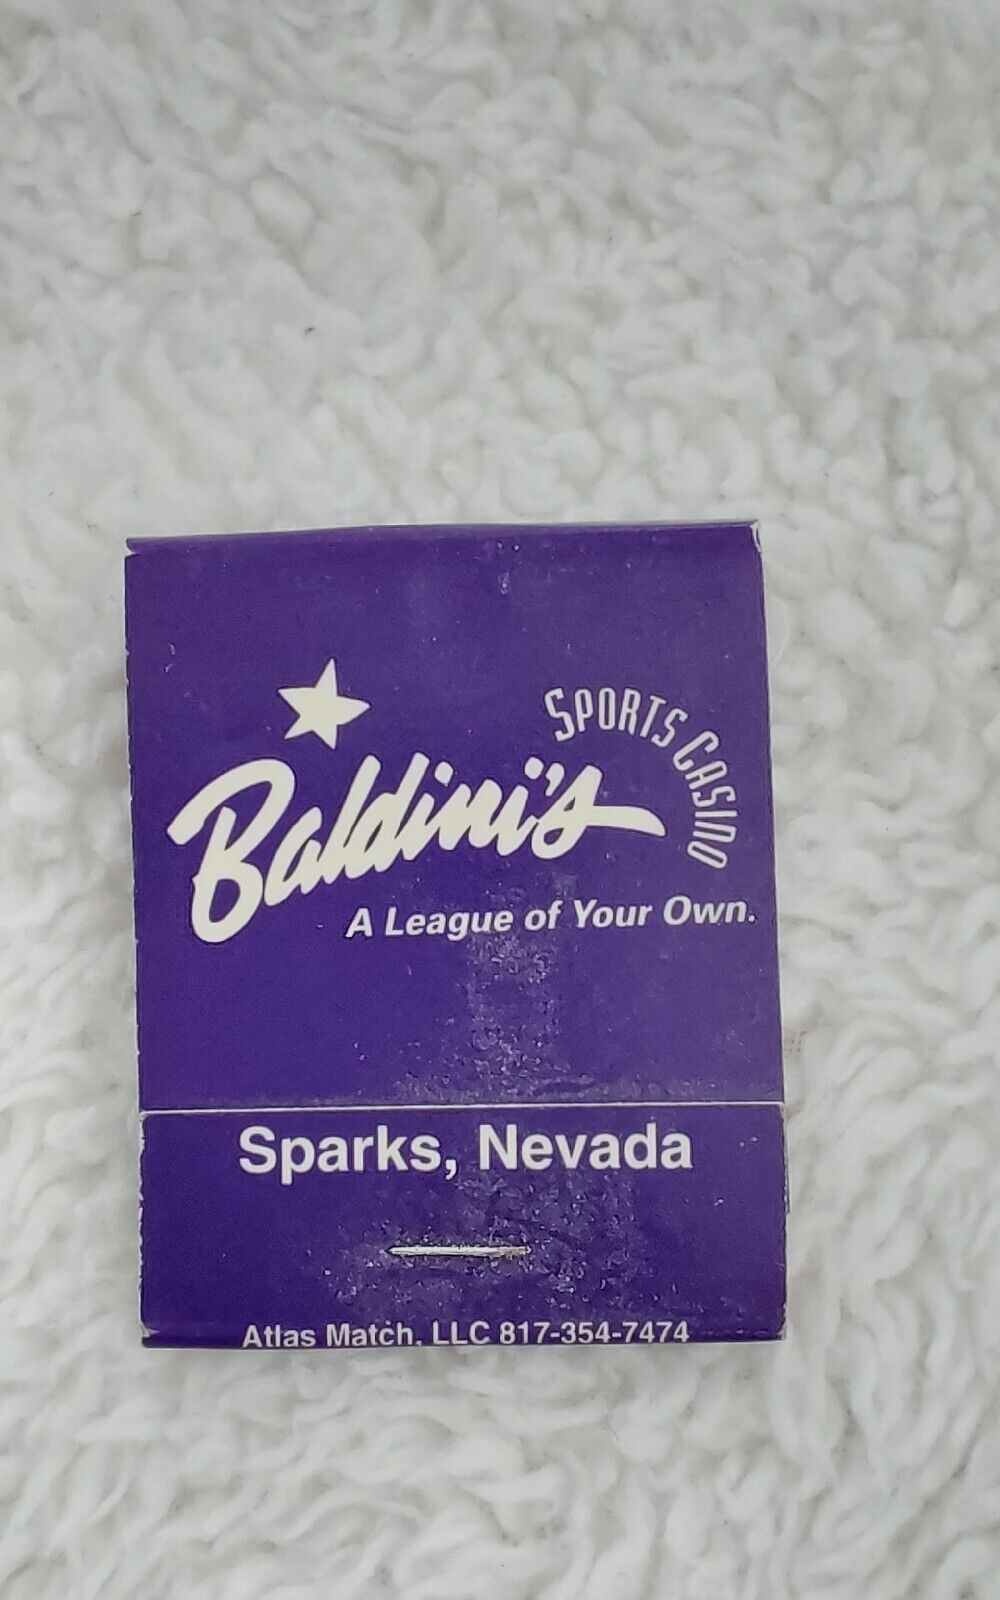 Baldini's Sports Casino Matchbook Sparks Nevada Matches Collectibles 